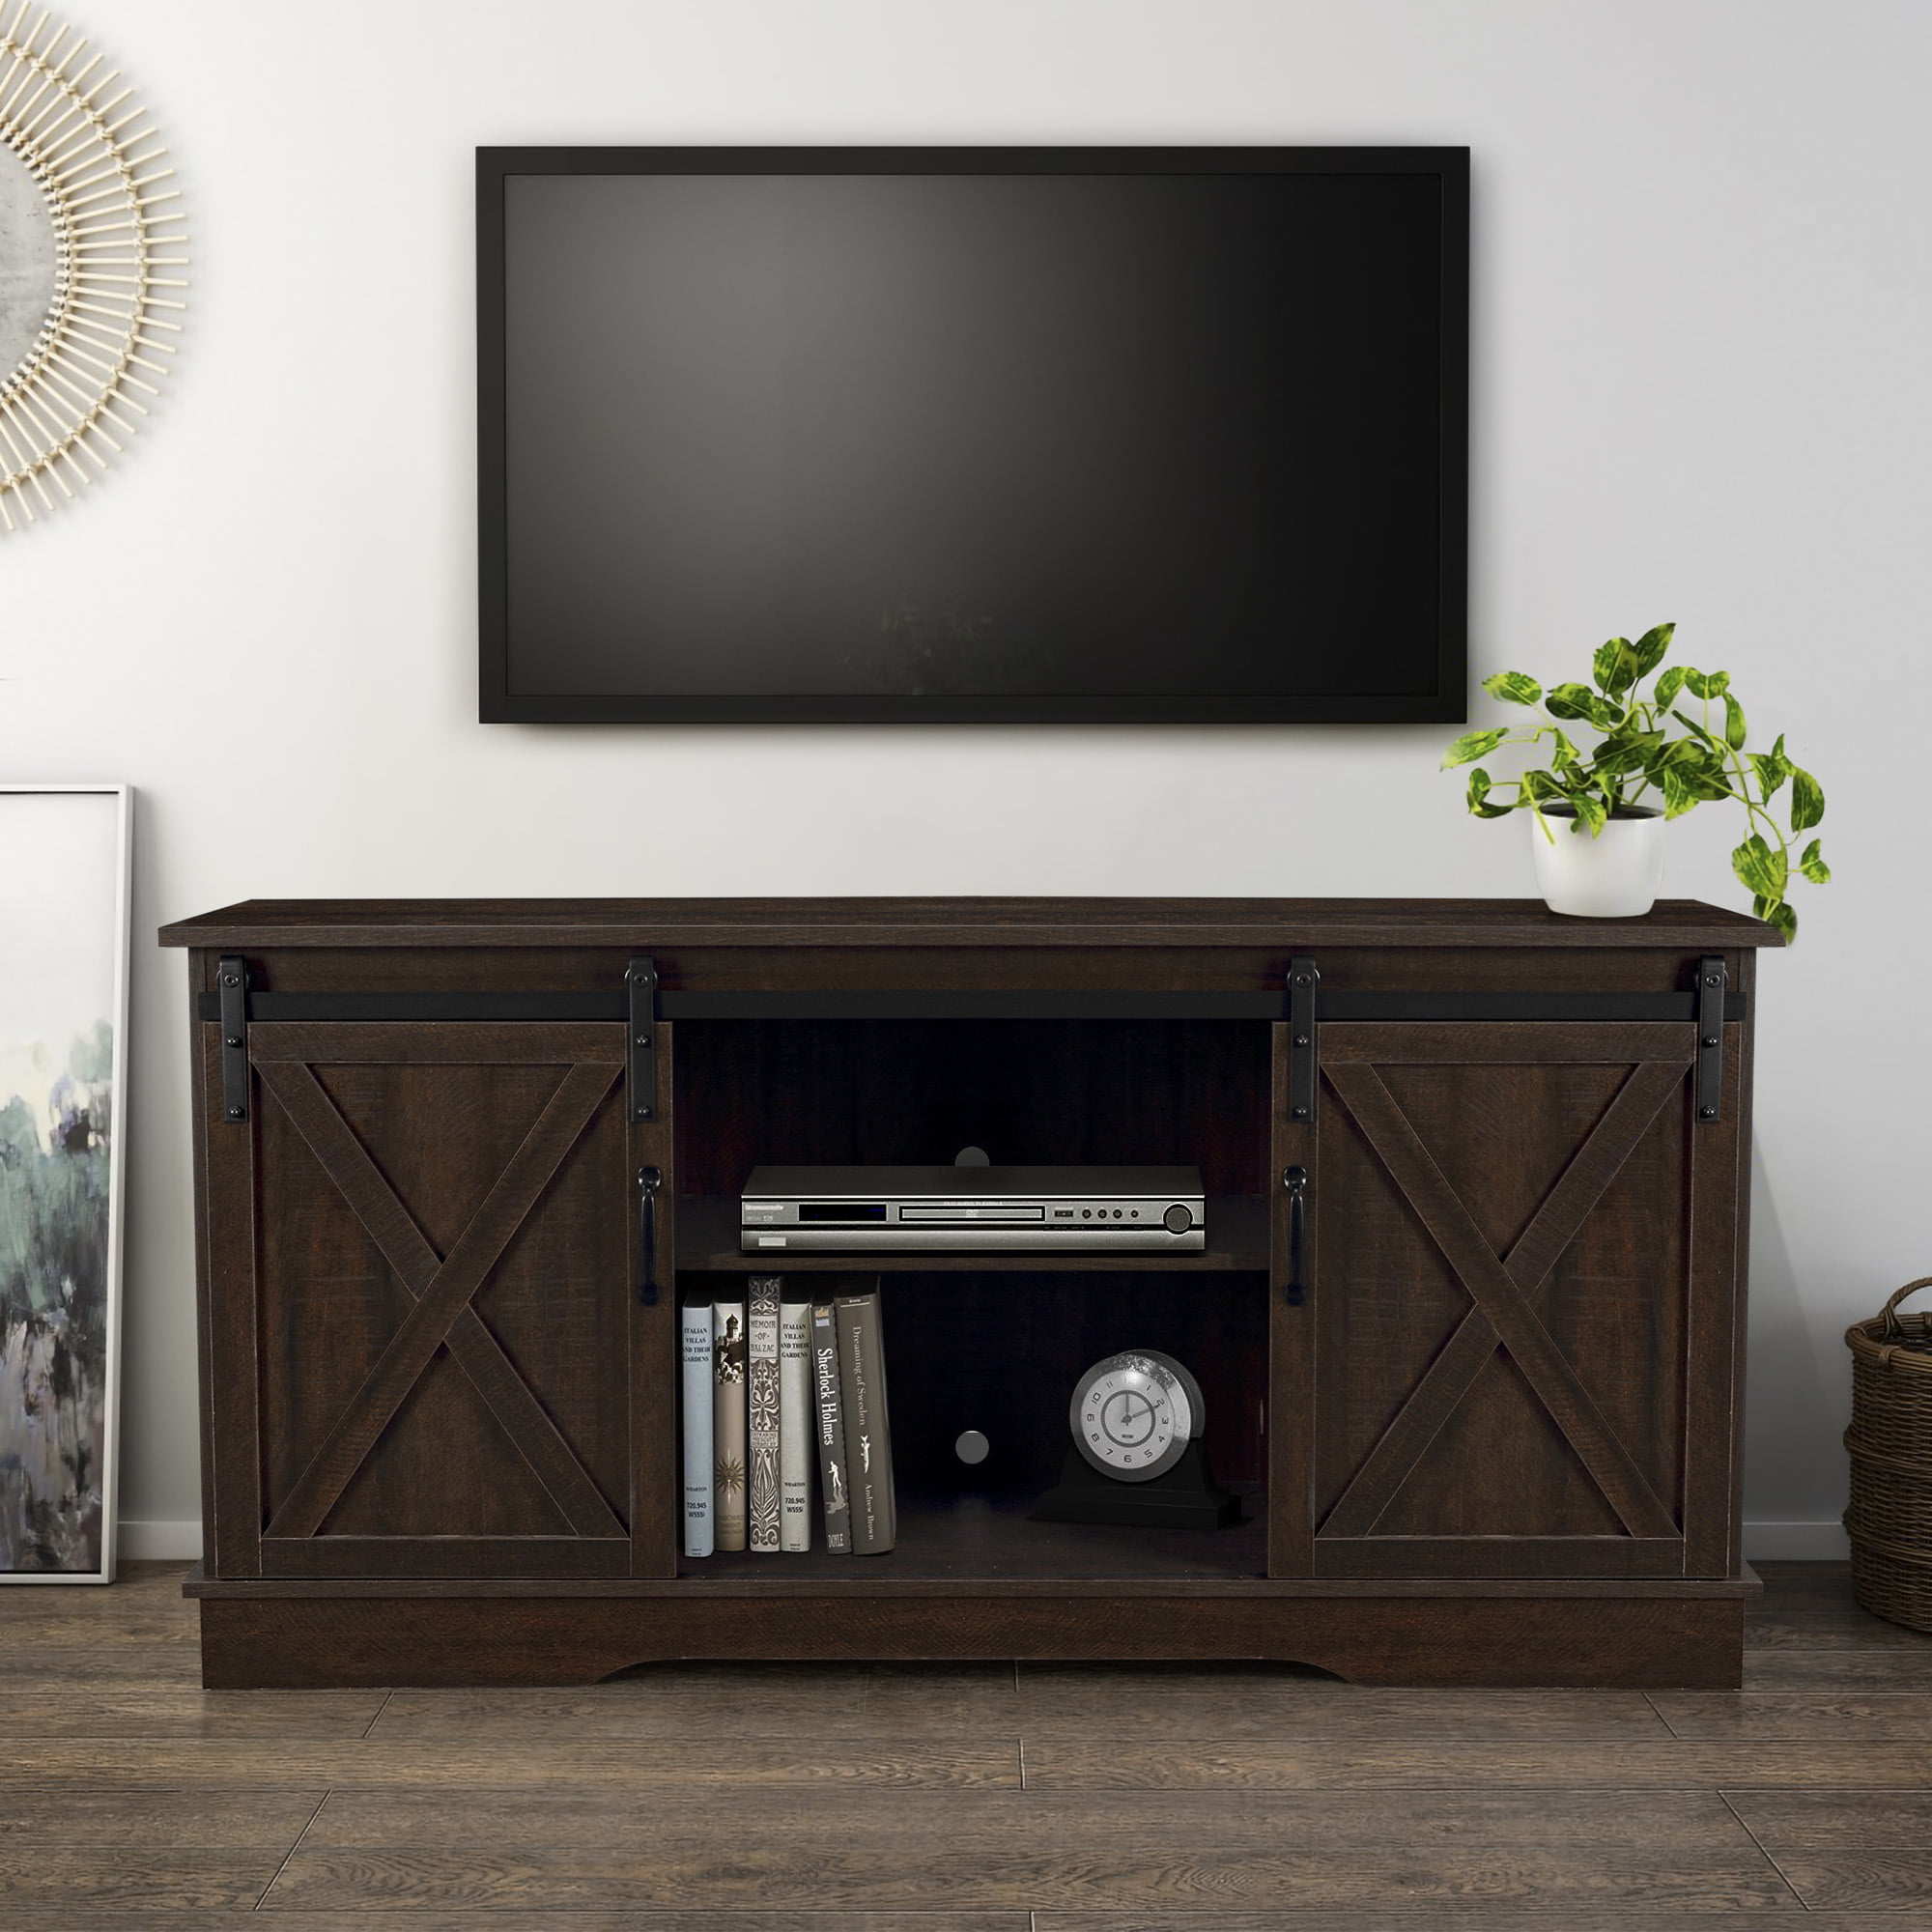 BELLEZE Modern Farmhouse Style 58 Inch TV Stand With 